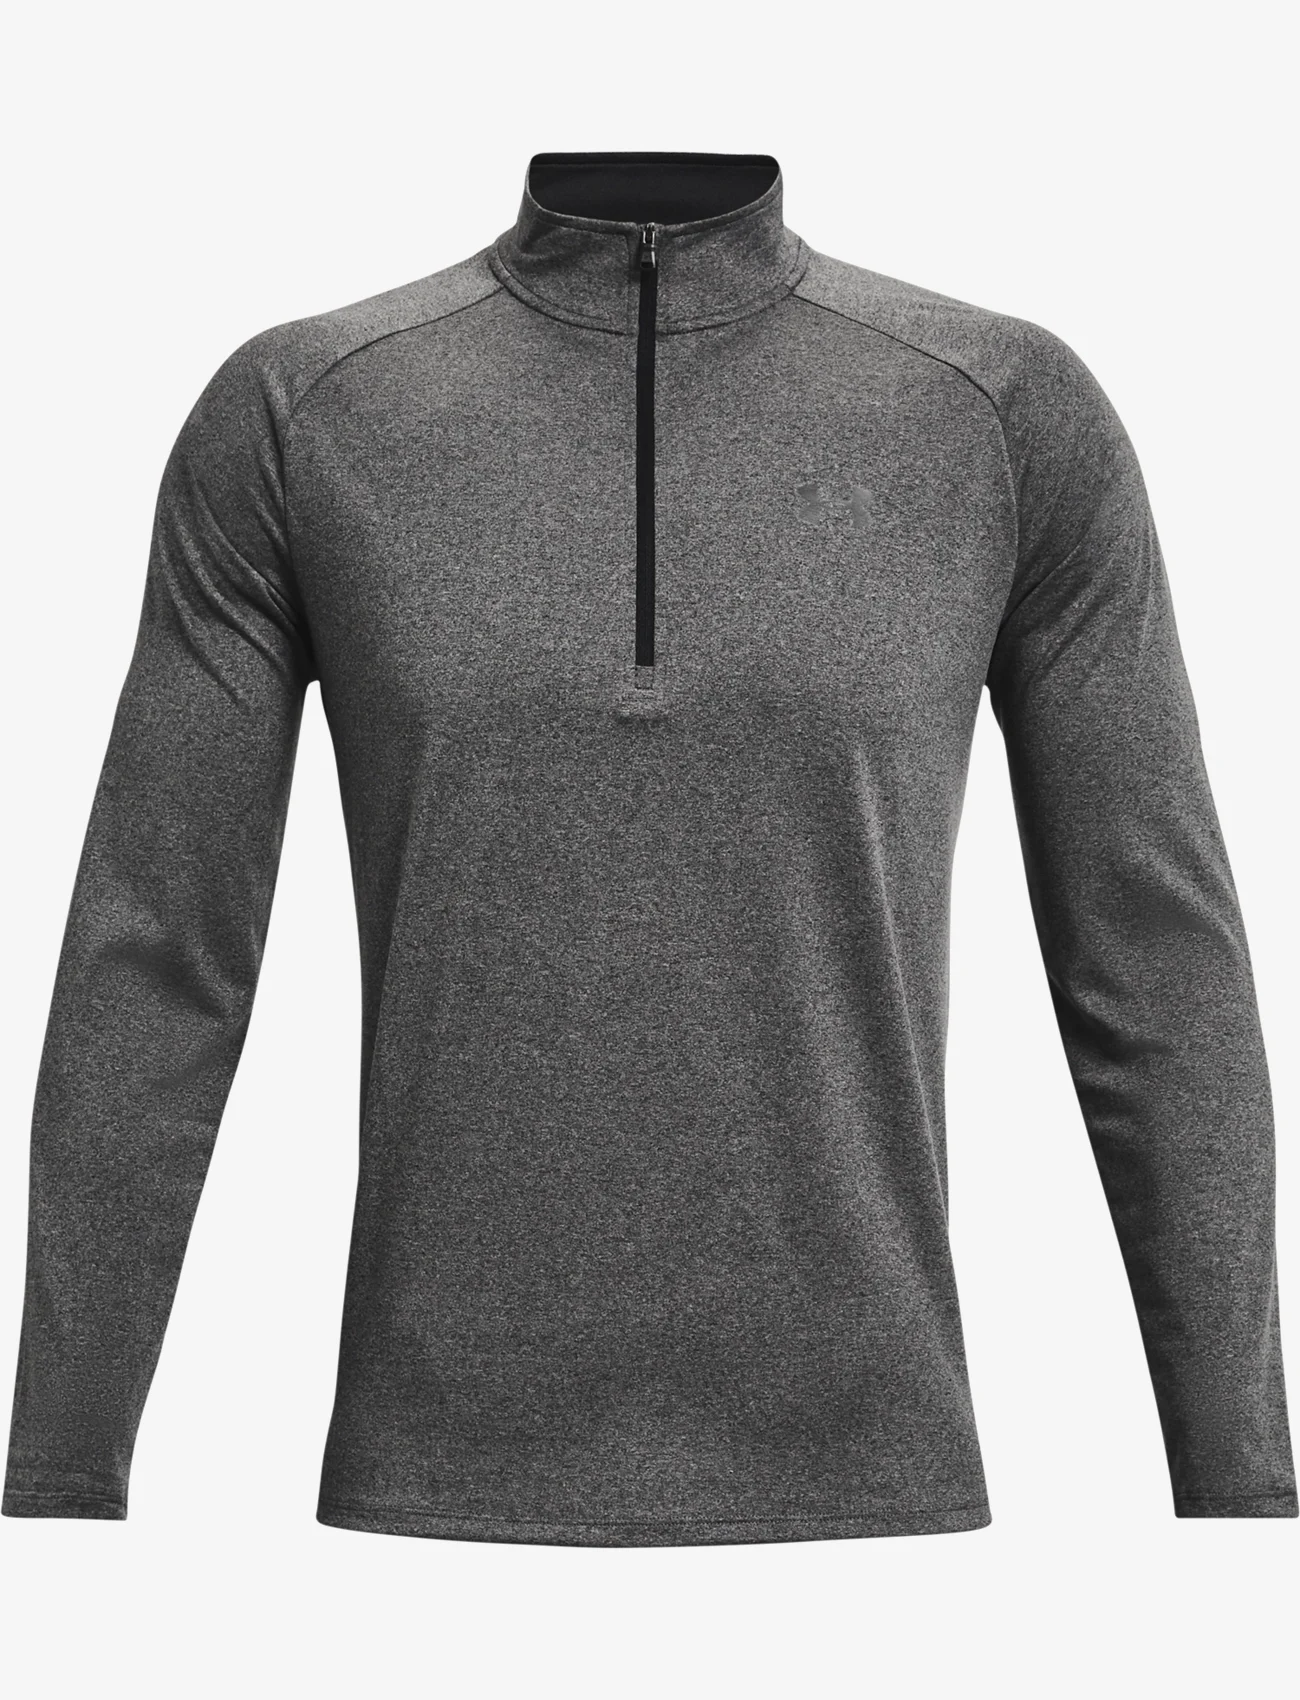 Under Armour - UA Tech 2.0 1/2 Zip - mid layer jackets - carbon heather - 0